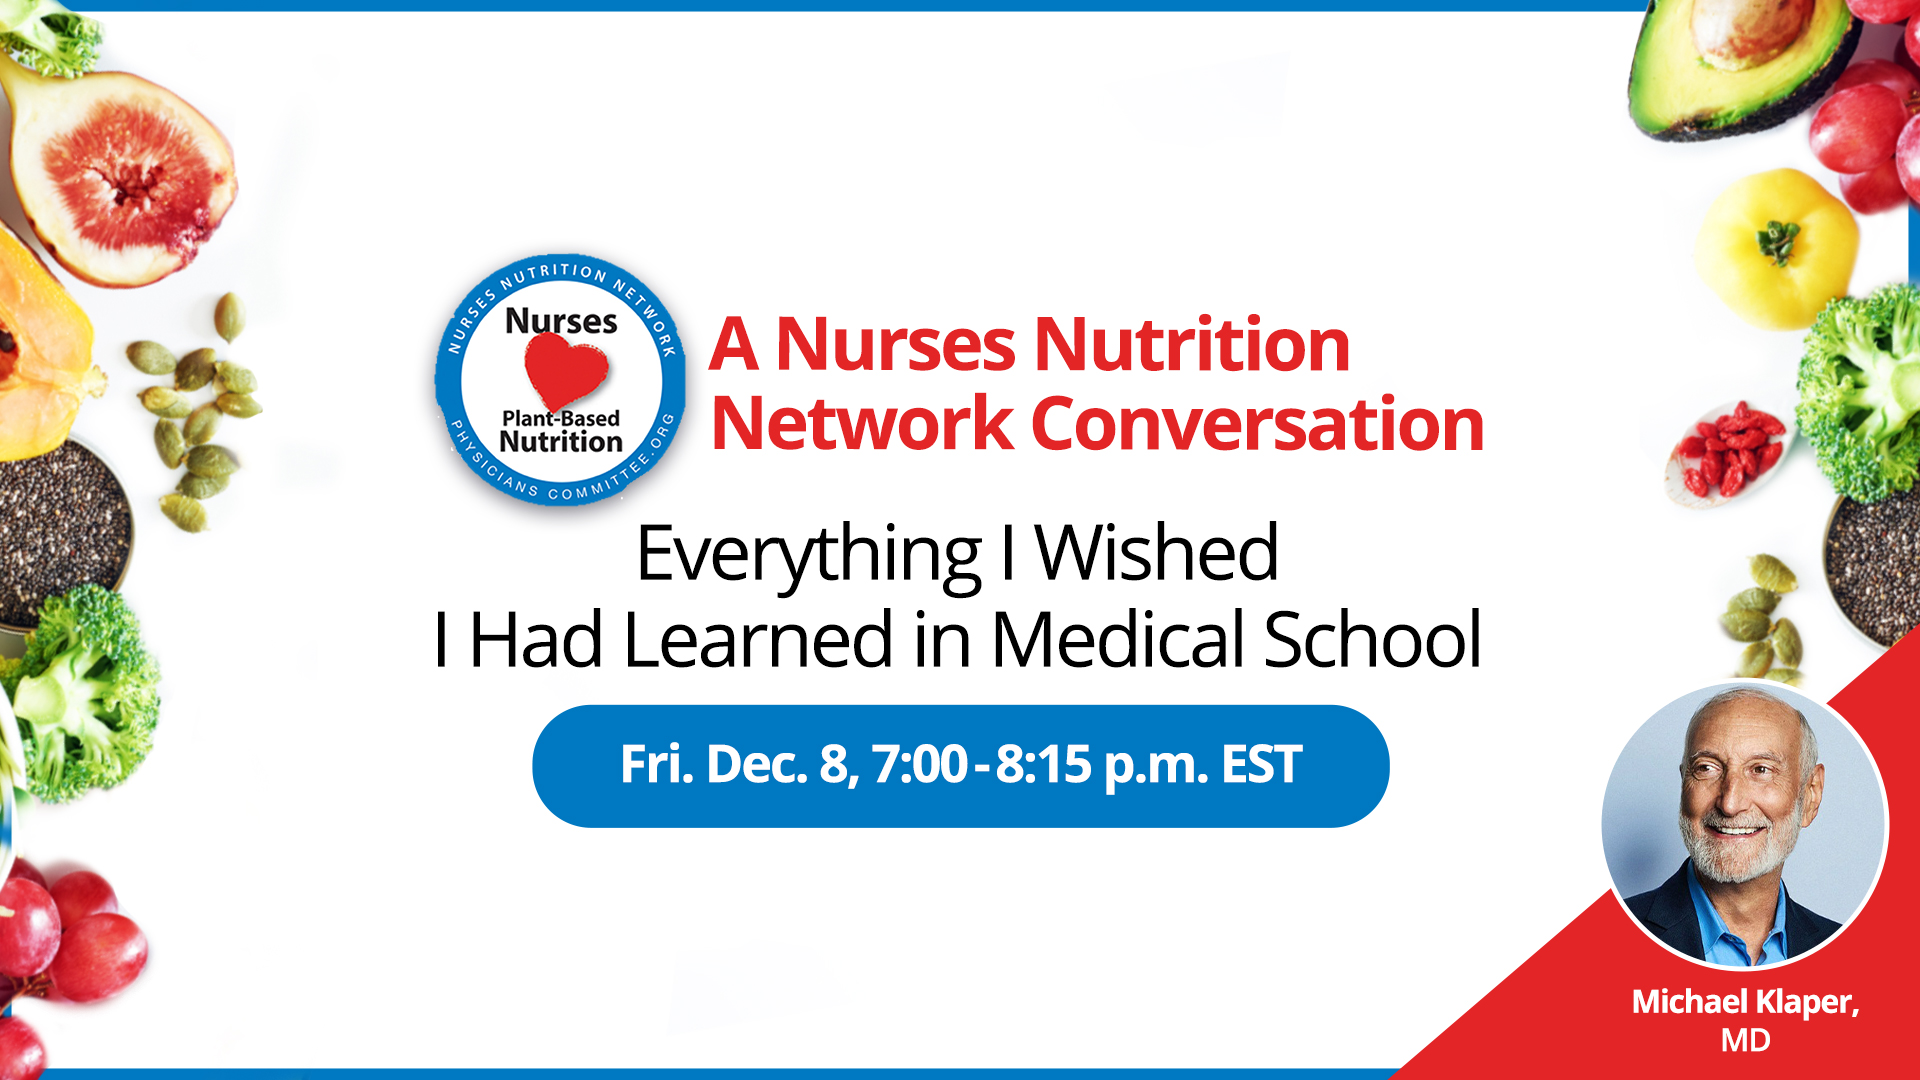 A Nurses Nutrition Network Conversation on Everything I Wished I Had Learned in Medical School